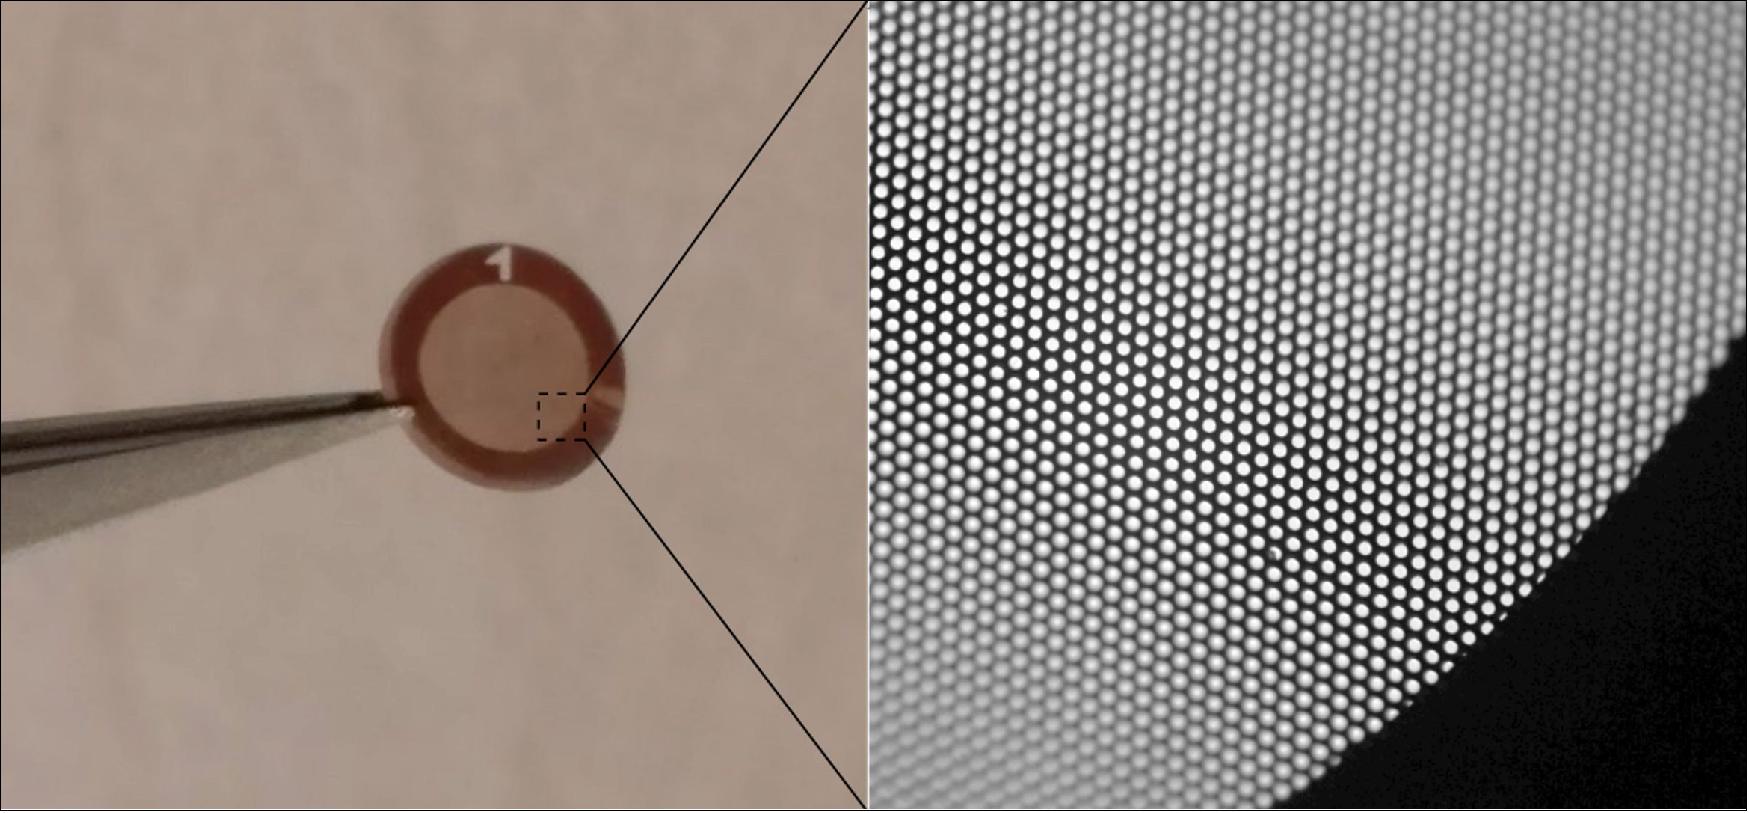 Figure 32: Graphene light sail. A tiny sail made of the thinnest material known – one carbon-atom-thick graphene – has passed initial tests designed to show that it could be a viable material to make solar sails for spacecraft. Light sails are one of the most promising existing space propulsion technologies that could enable us to reach other star systems within many decades (image credit: Graphene Sail team)